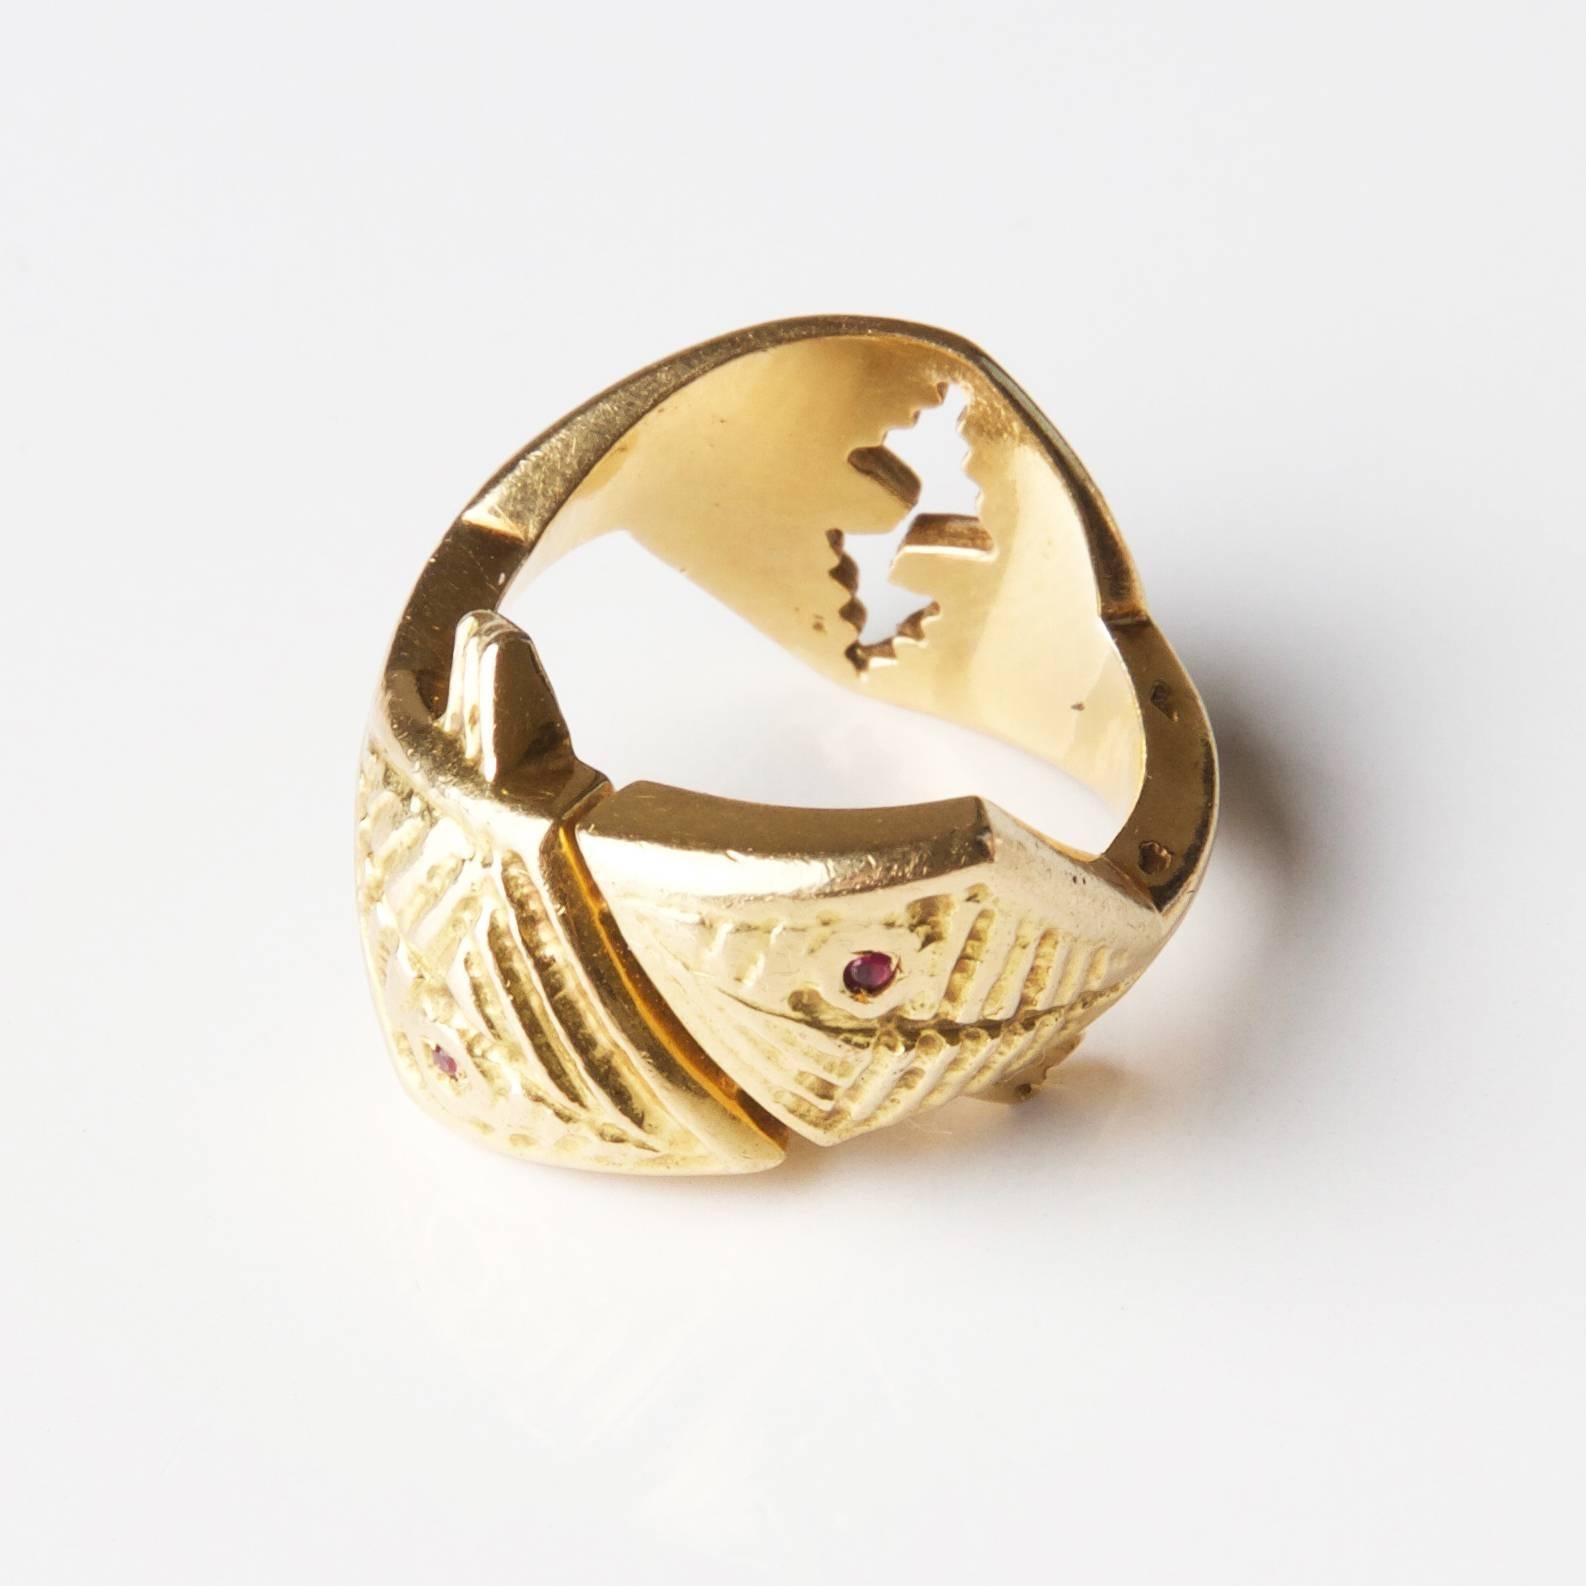 Very Rare 18K Gold and roundcut Ruby ring by Georges Braque (1882-1963), inventor of cubism. 
It is signed 